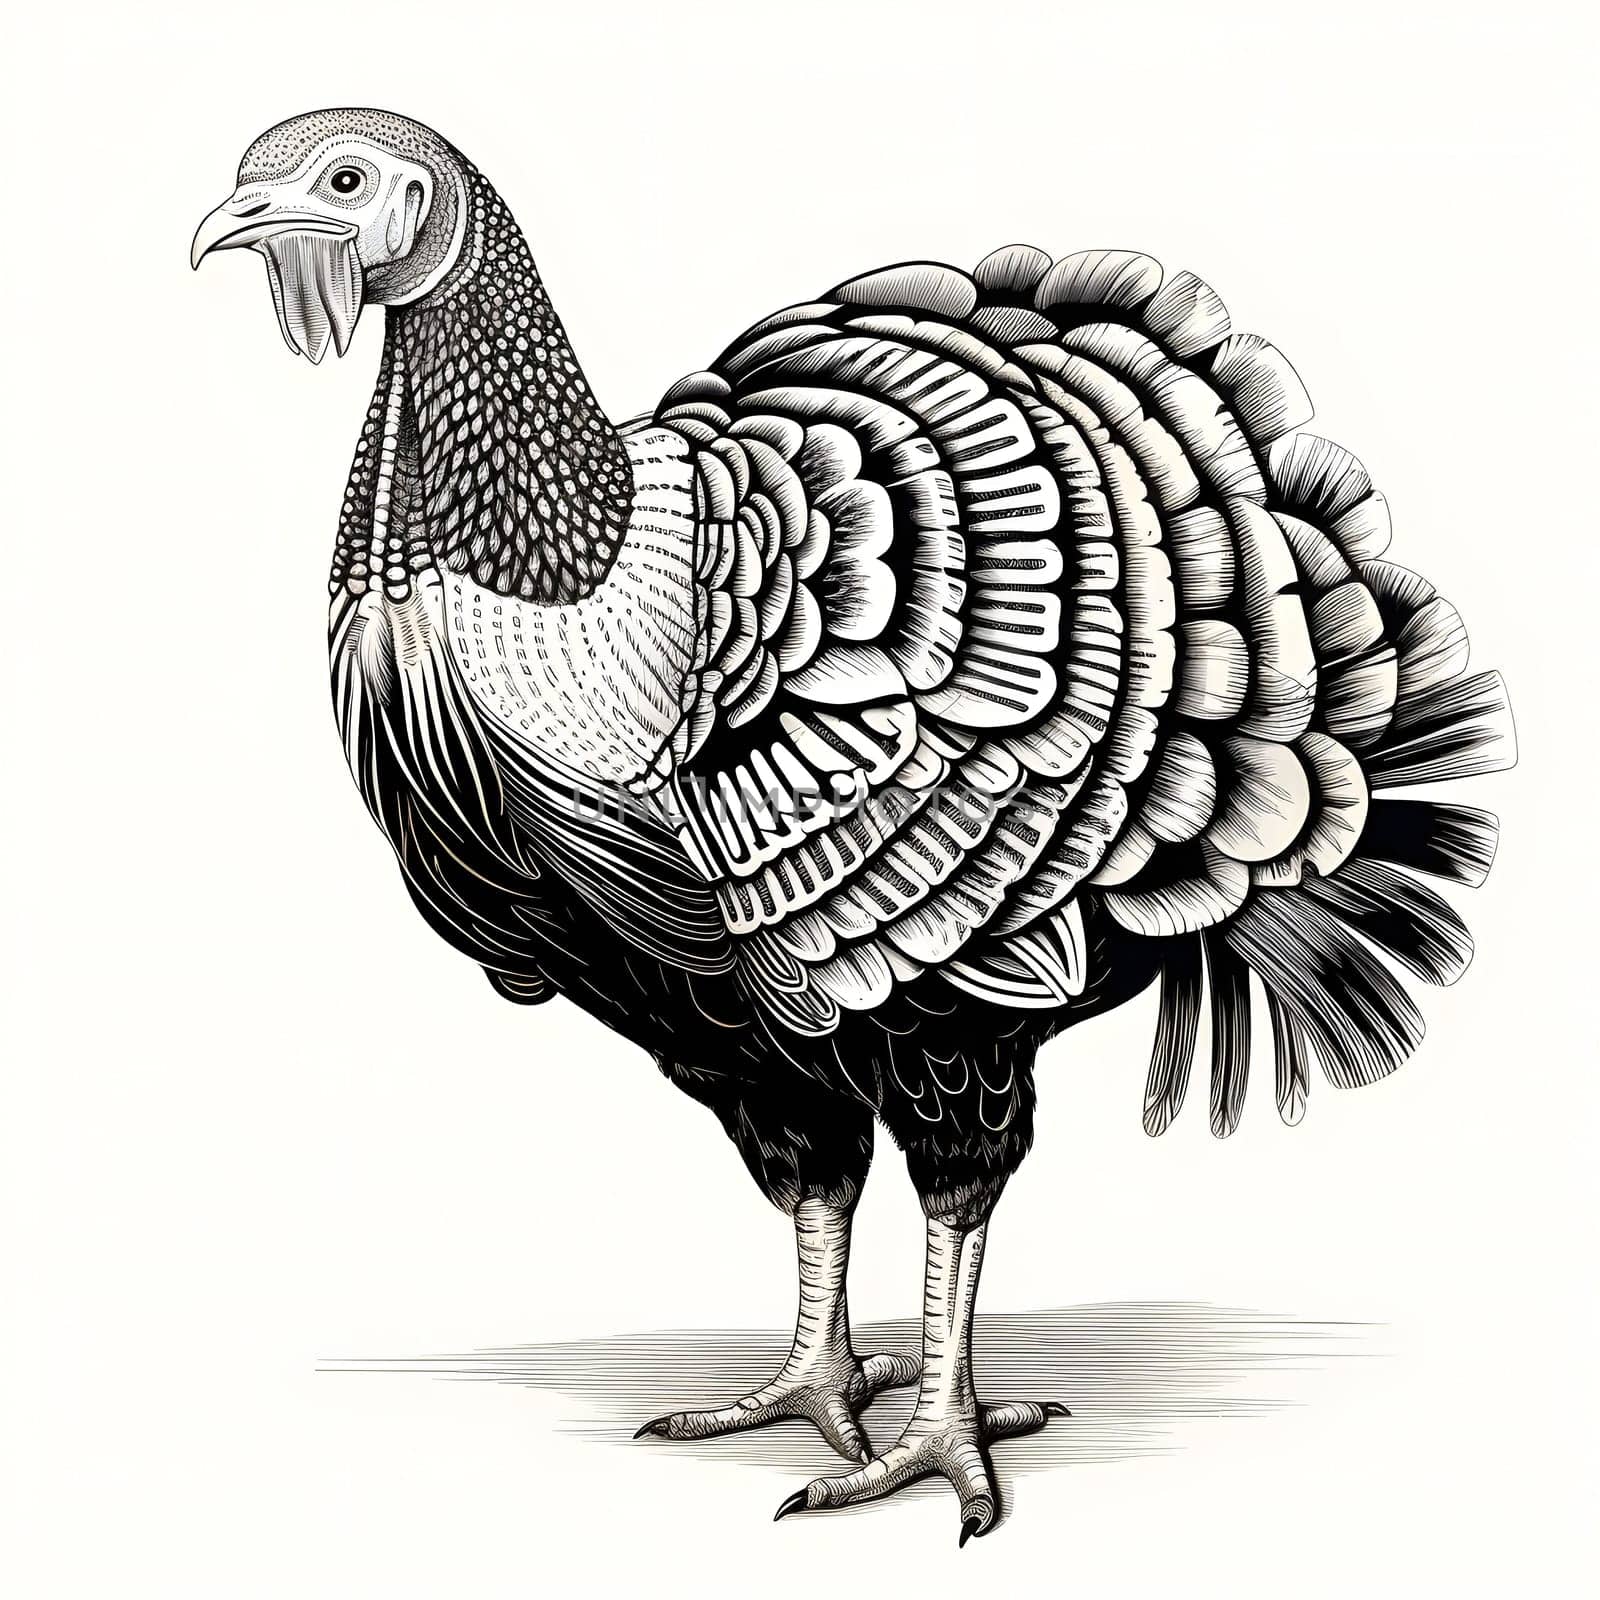 Black and white turkey engraving. Turkey as the main dish of thanksgiving for the harvest, picture on a white isolated background. An atmosphere of joy and celebration.